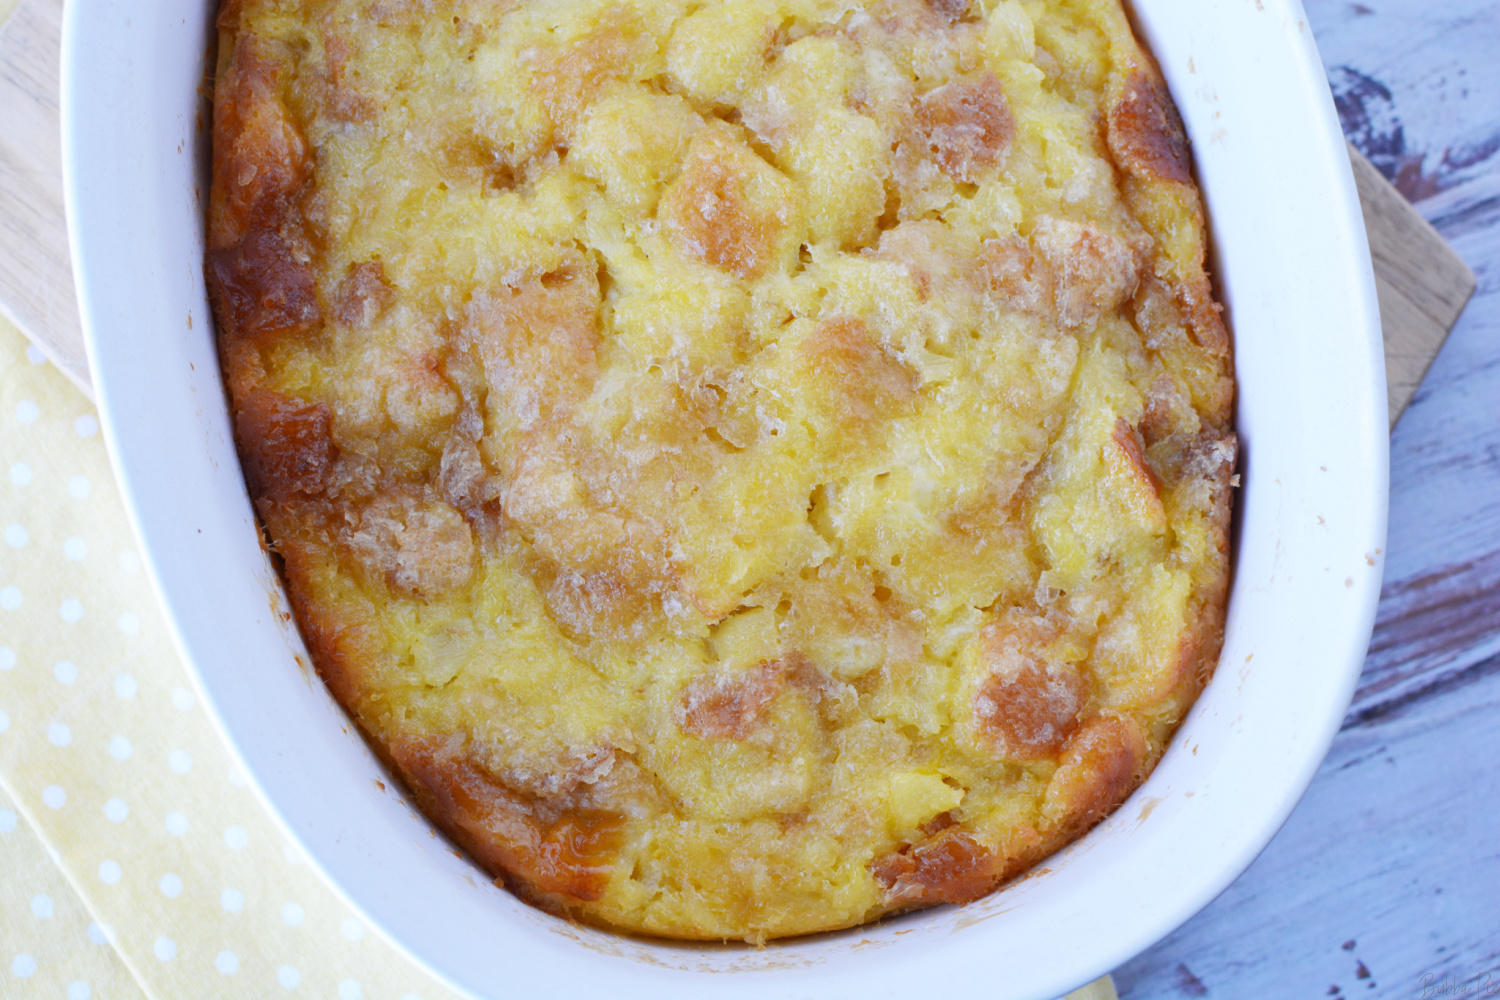 Pineapple Souffle Recipe out of the oven in a casserole dish.